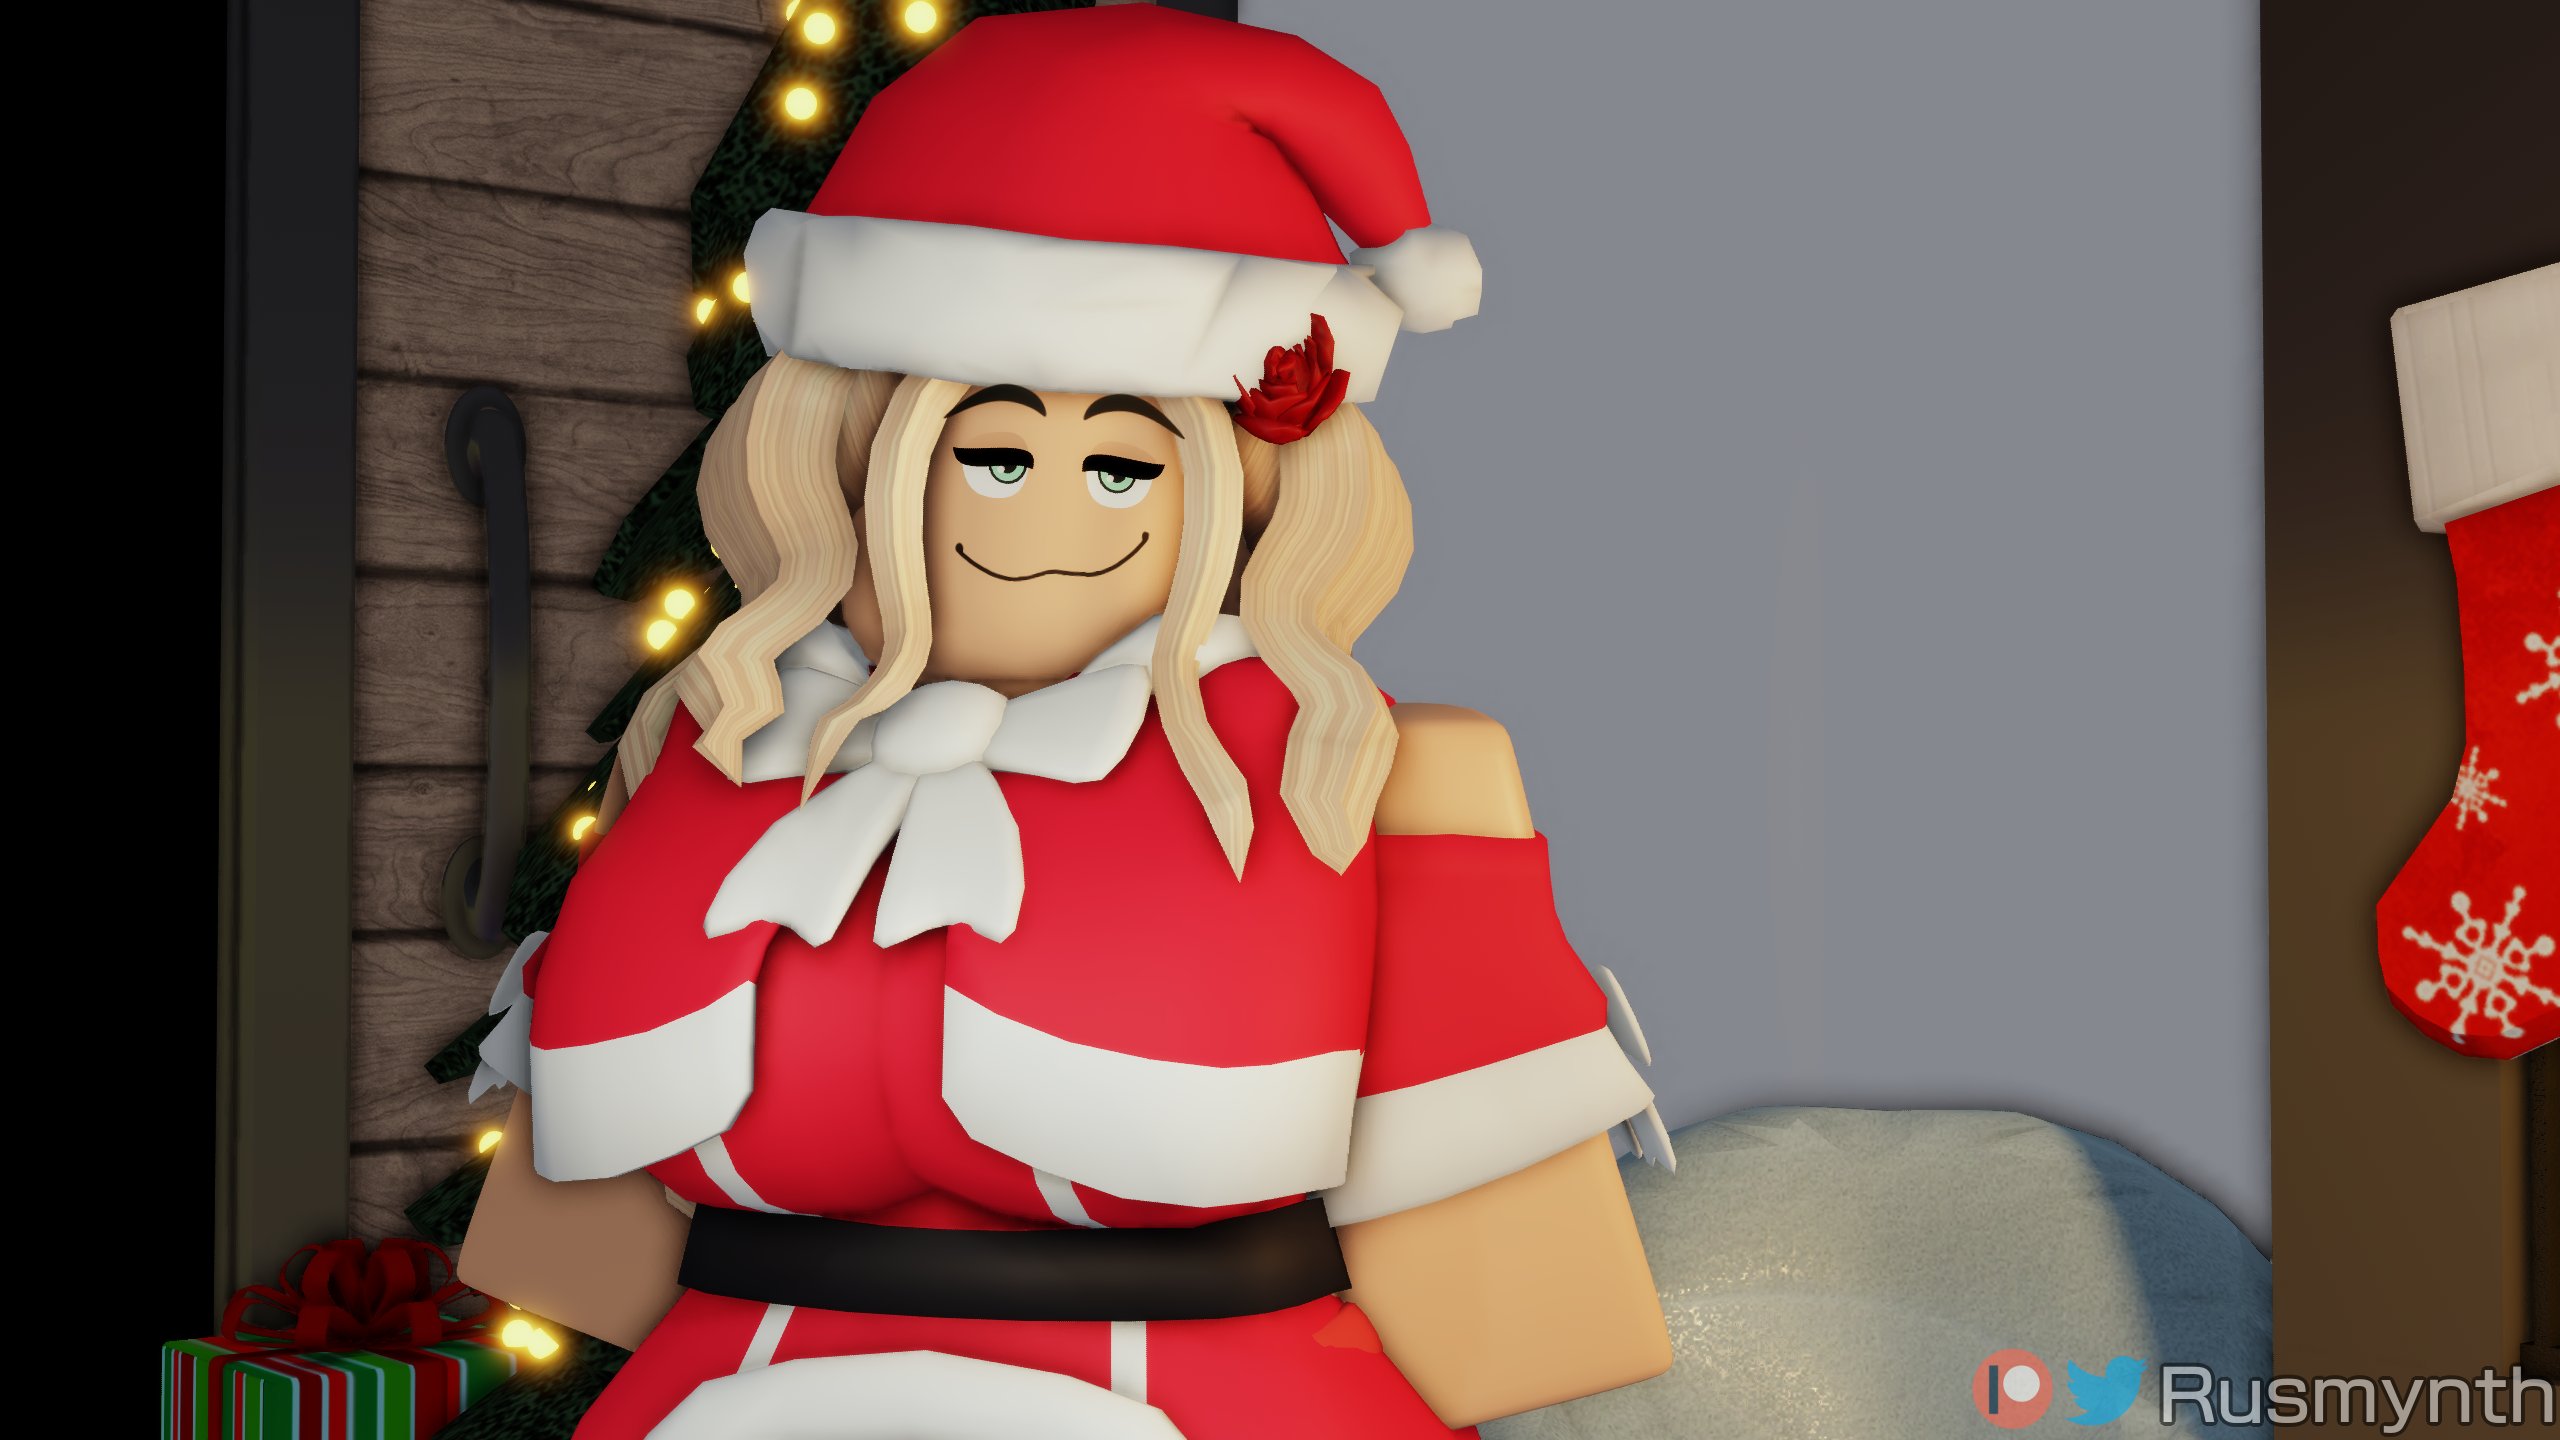 The Most Exciting Animated Roblox Pornography You Can Find Online